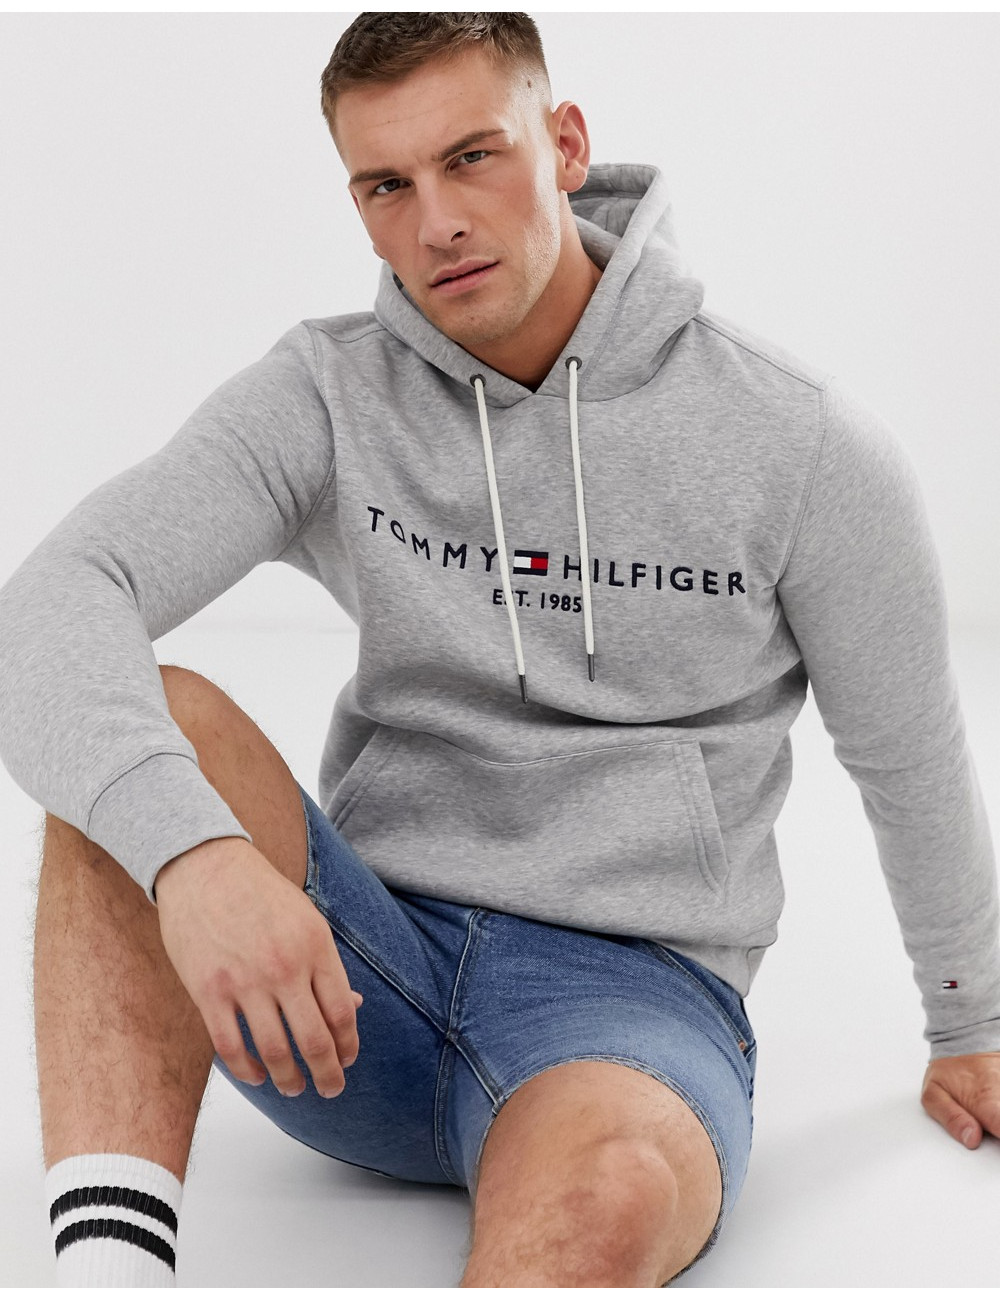 Tommy Hilfiger embroidered...